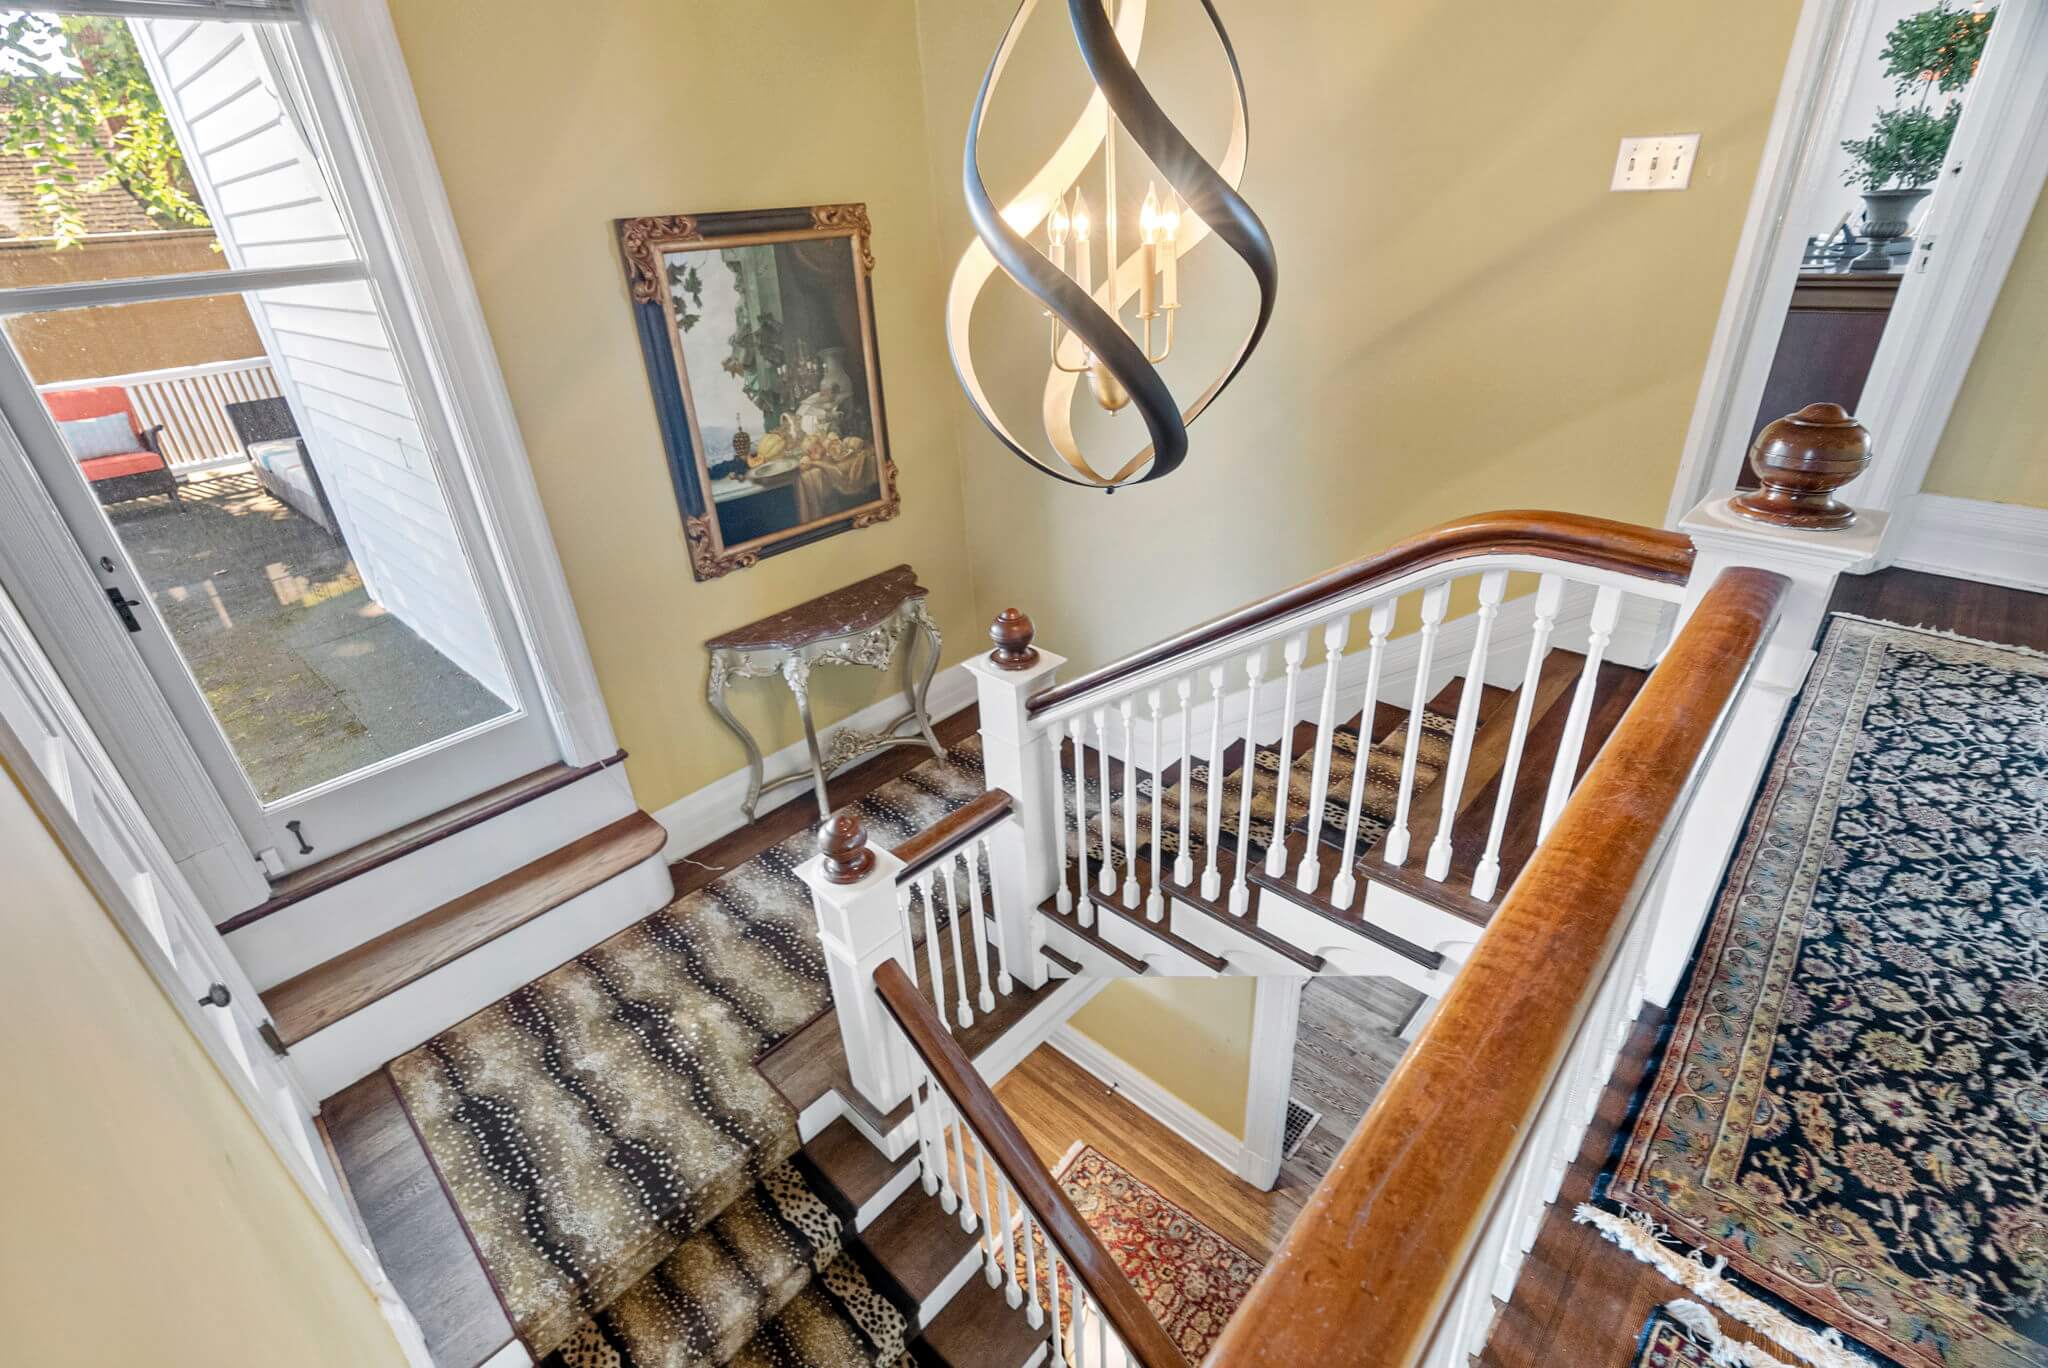 The formal staircase offers access to a roof-top deck over the porte-cochere